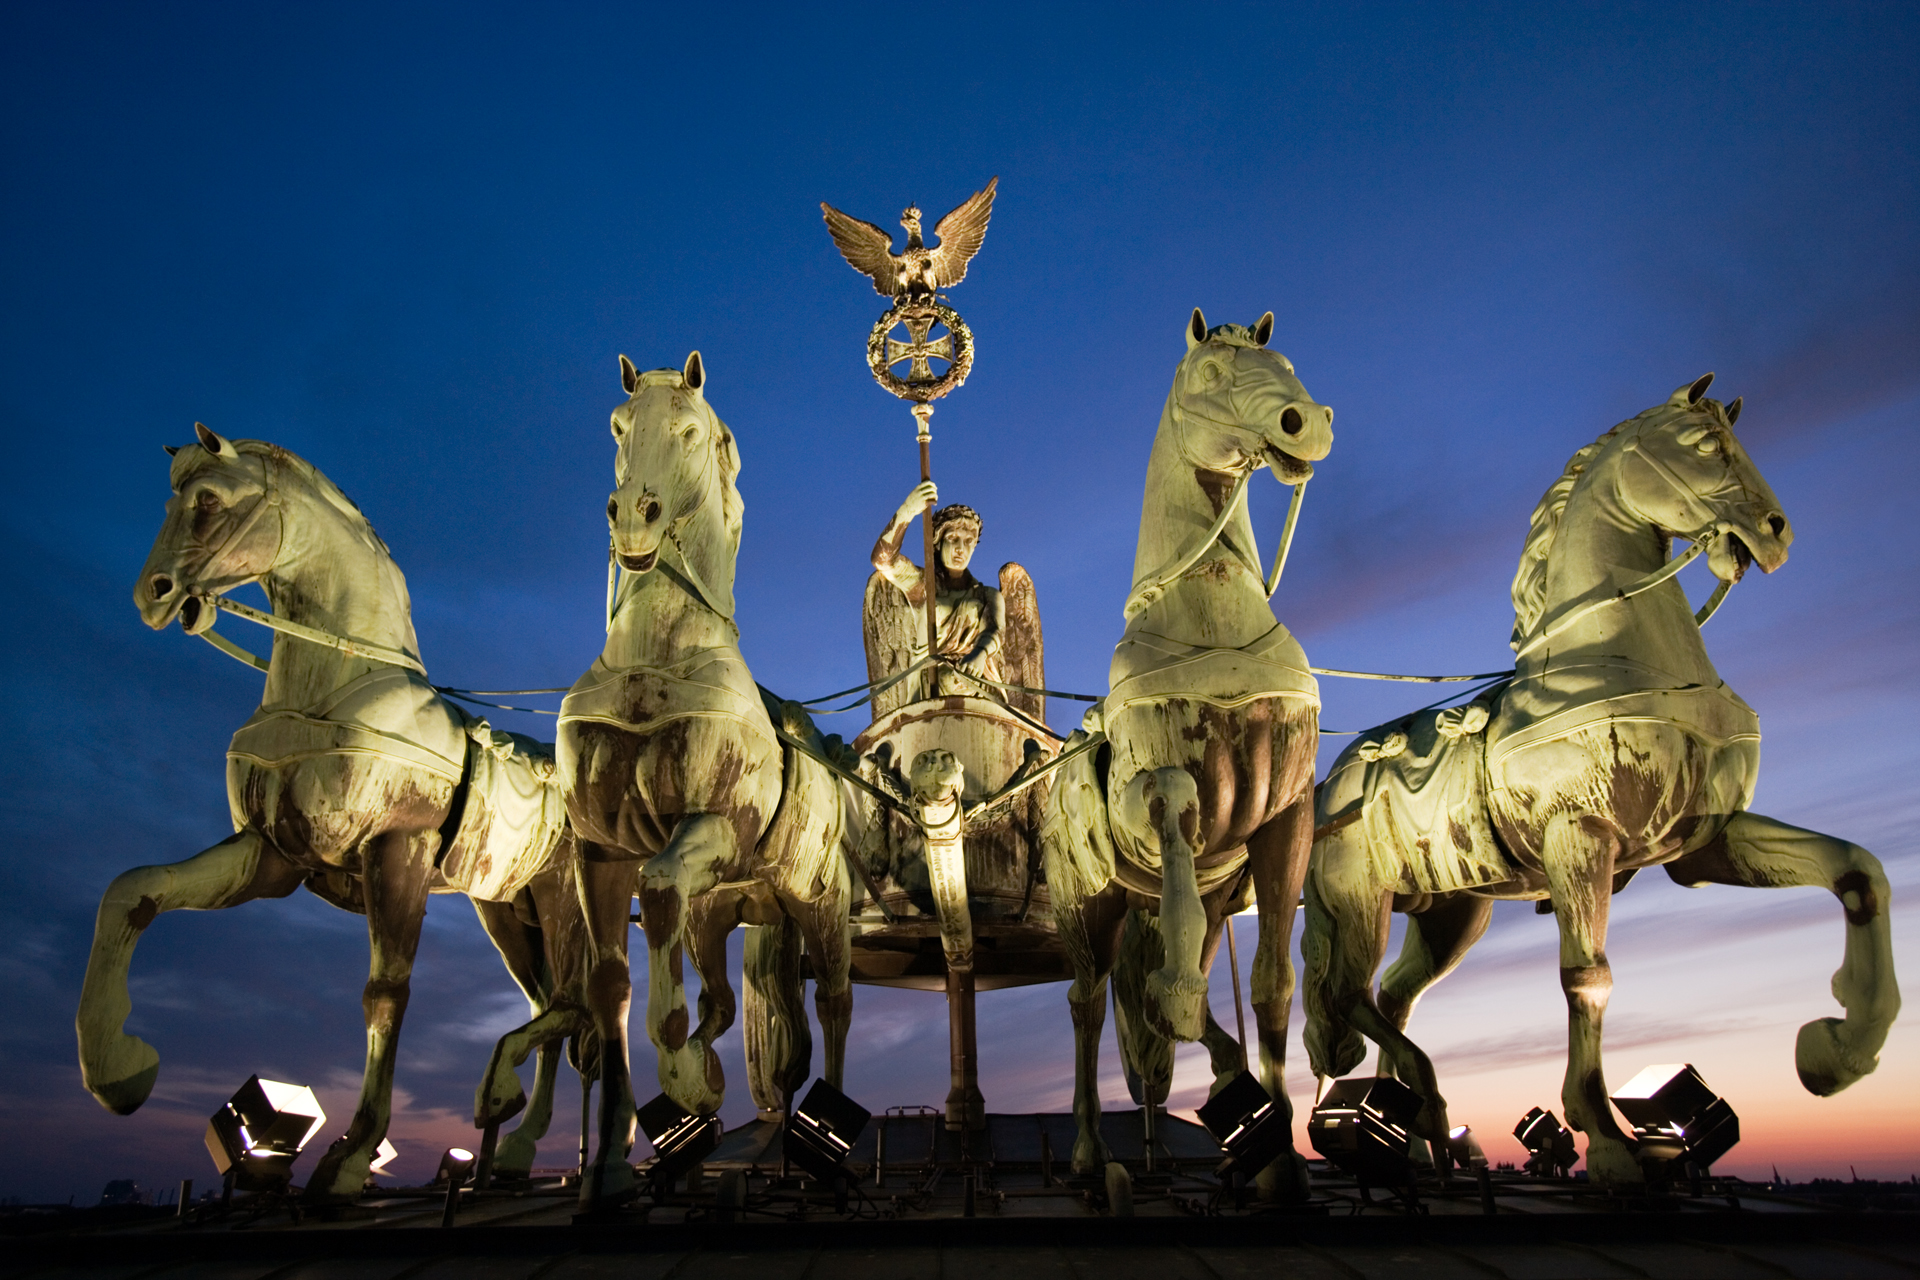  The Quadriga crowns the Brandenburg Gate, Berlin’s trademark triumphal arch. The four-horse chariot was looted by Napoleon in 1806 but returned after his defeat in the Battle of the Nations.  Berlin, Germany  